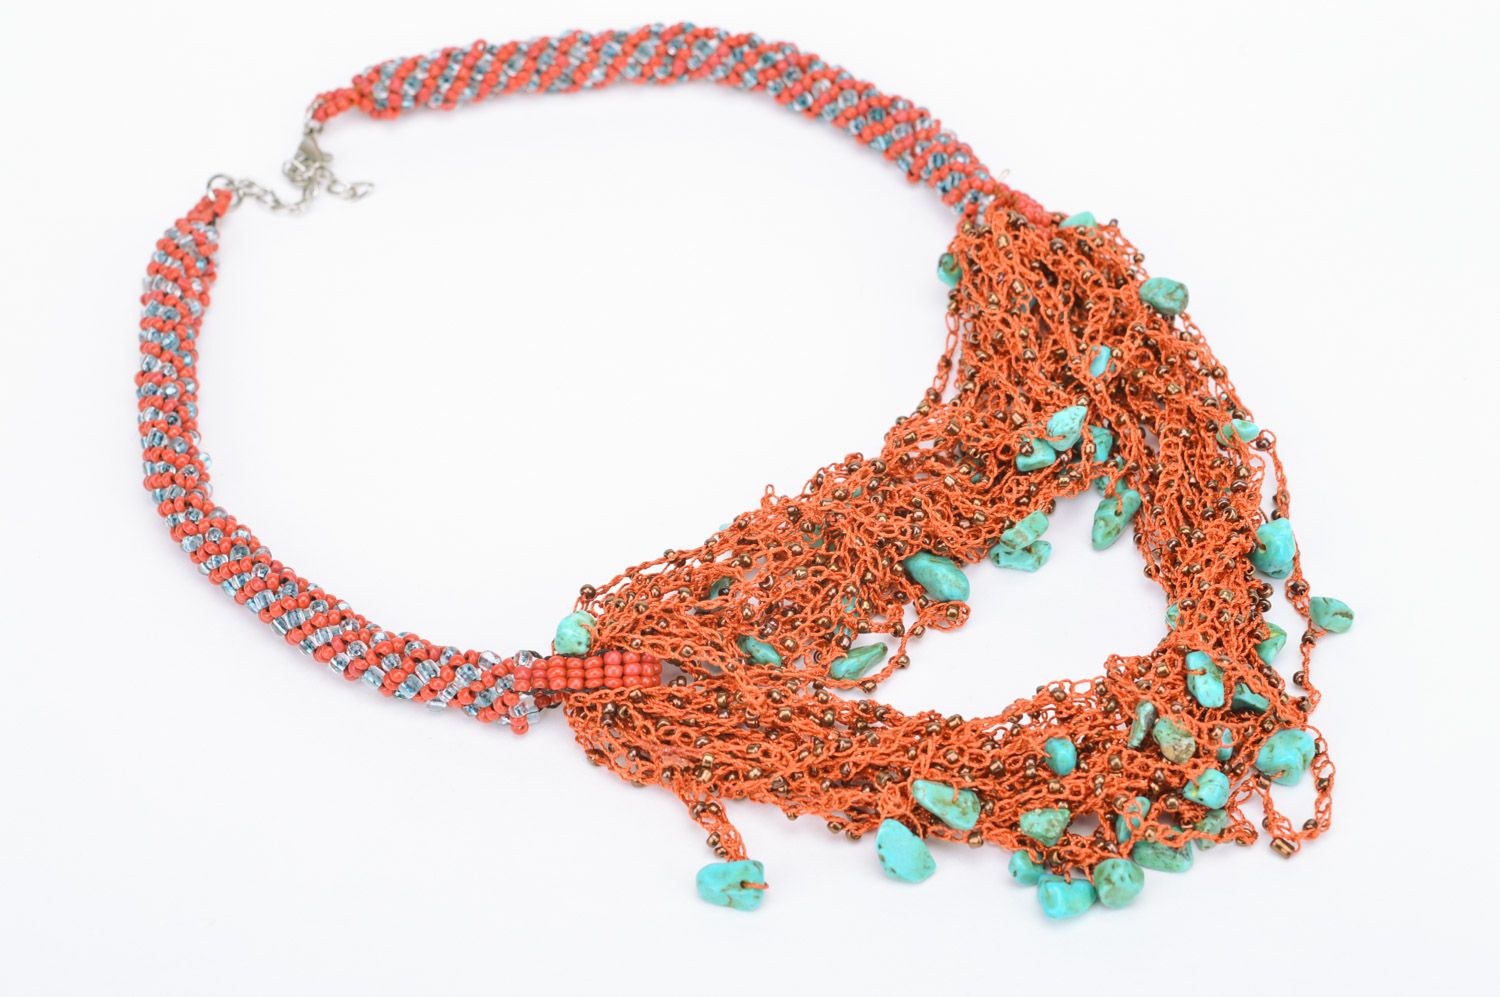 Handmade massive multi row necklace woven of Czech beads and turquoise beads photo 5